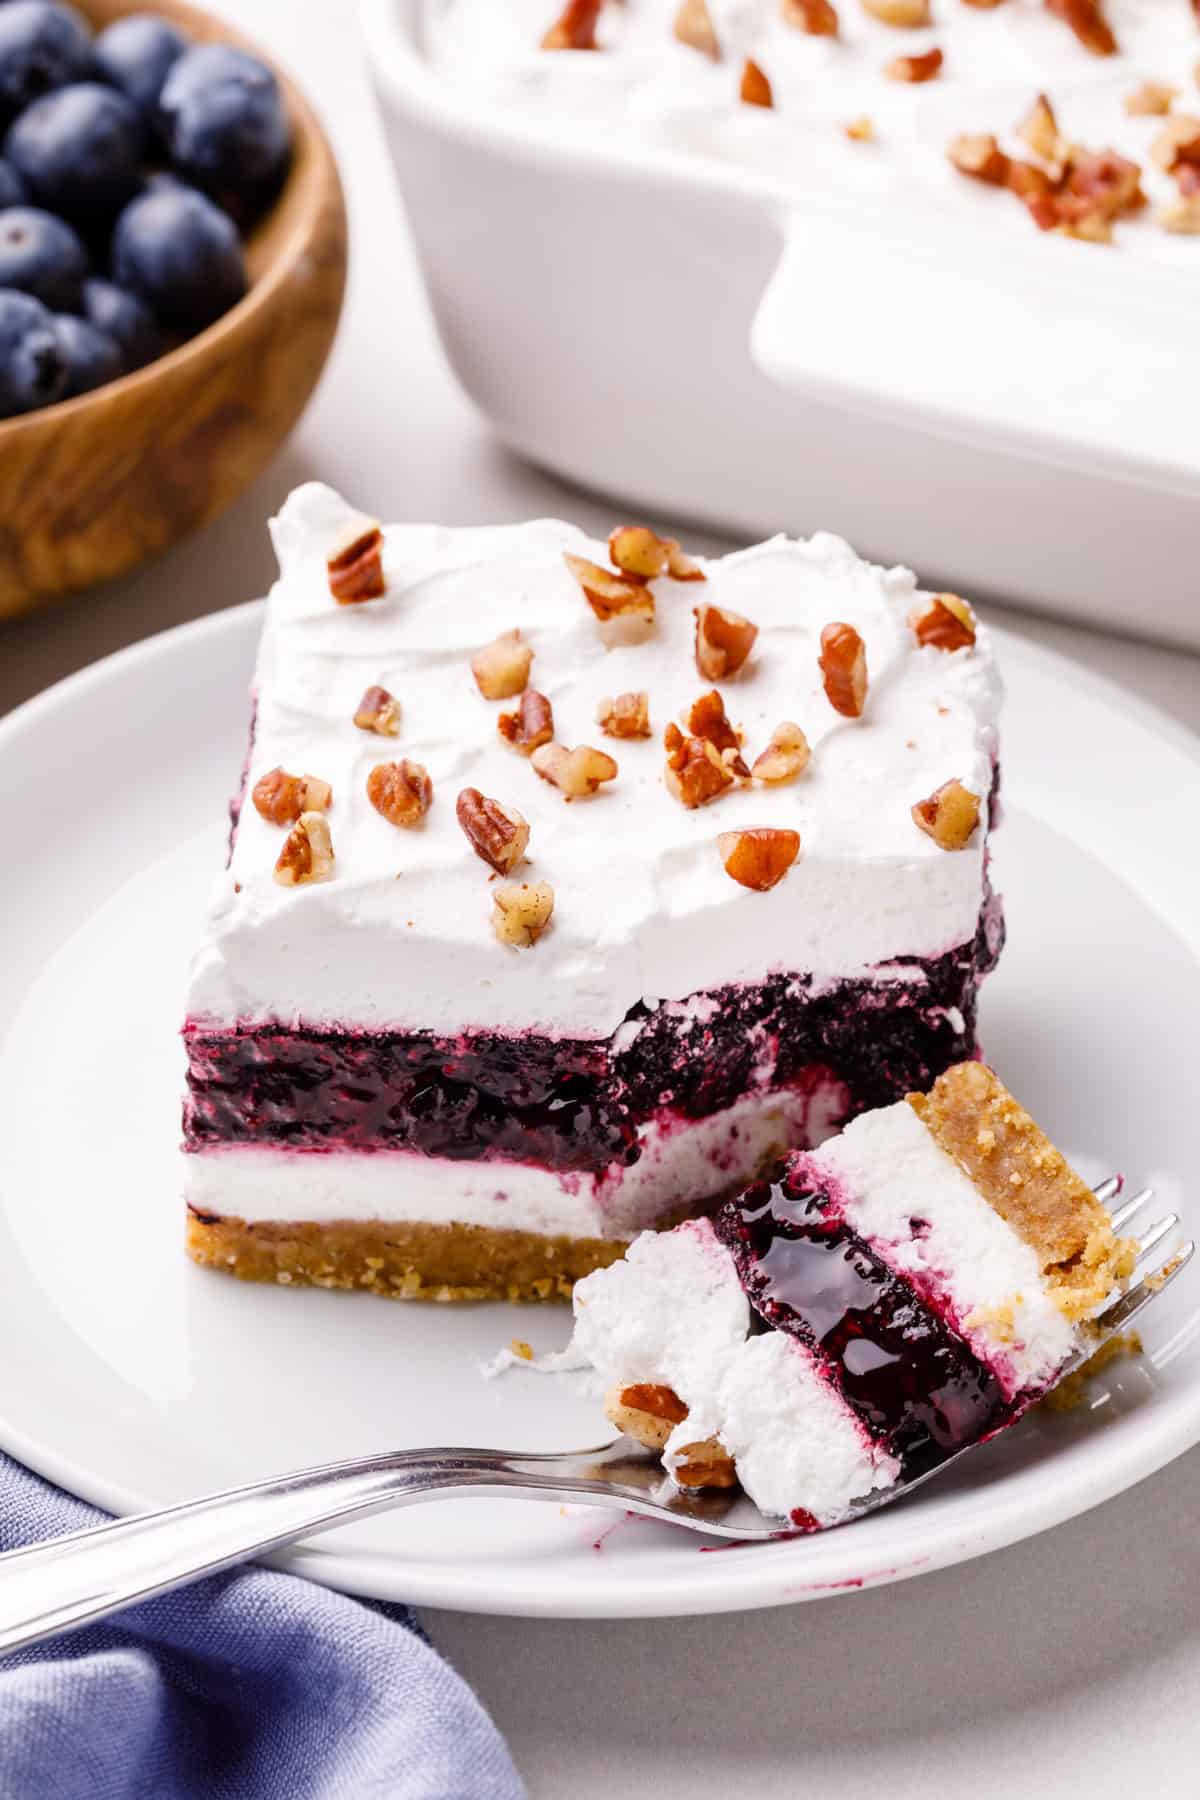 blueberry delight with a forkful of the dessert serve on a white plate